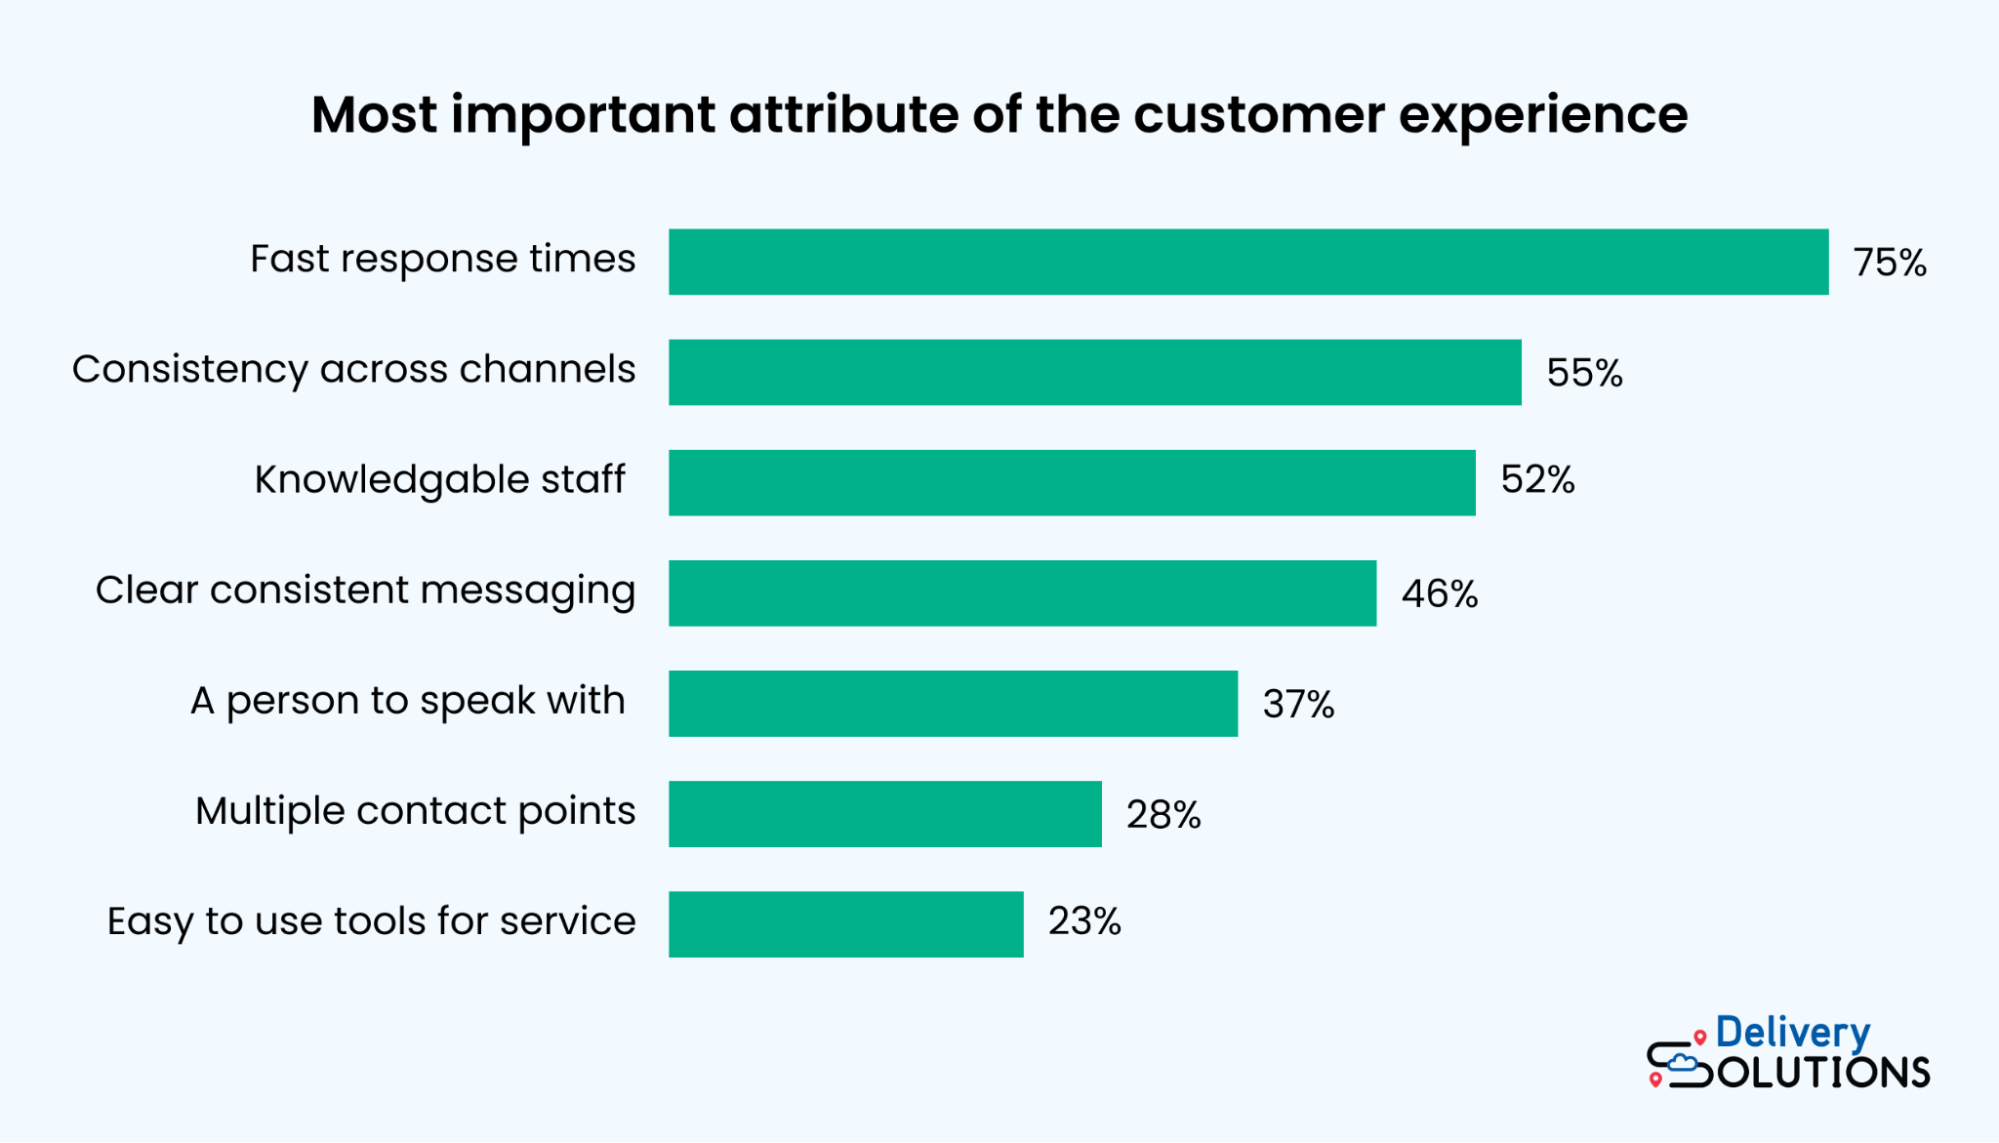 Graph showing the most important attributes of customer experience